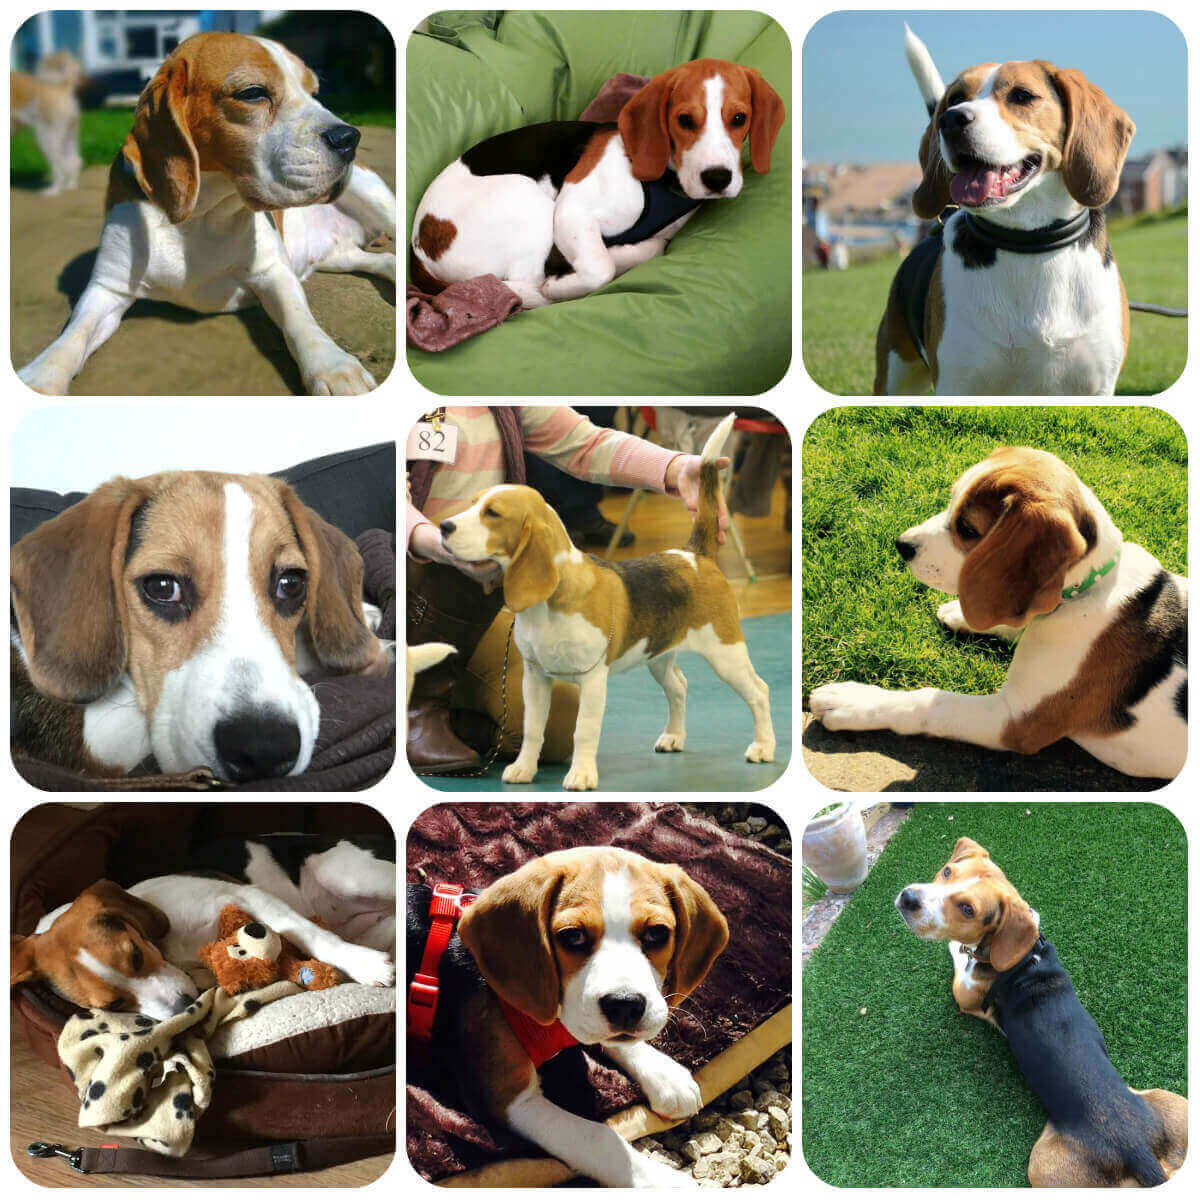 A collage of 9 photos of Beagles